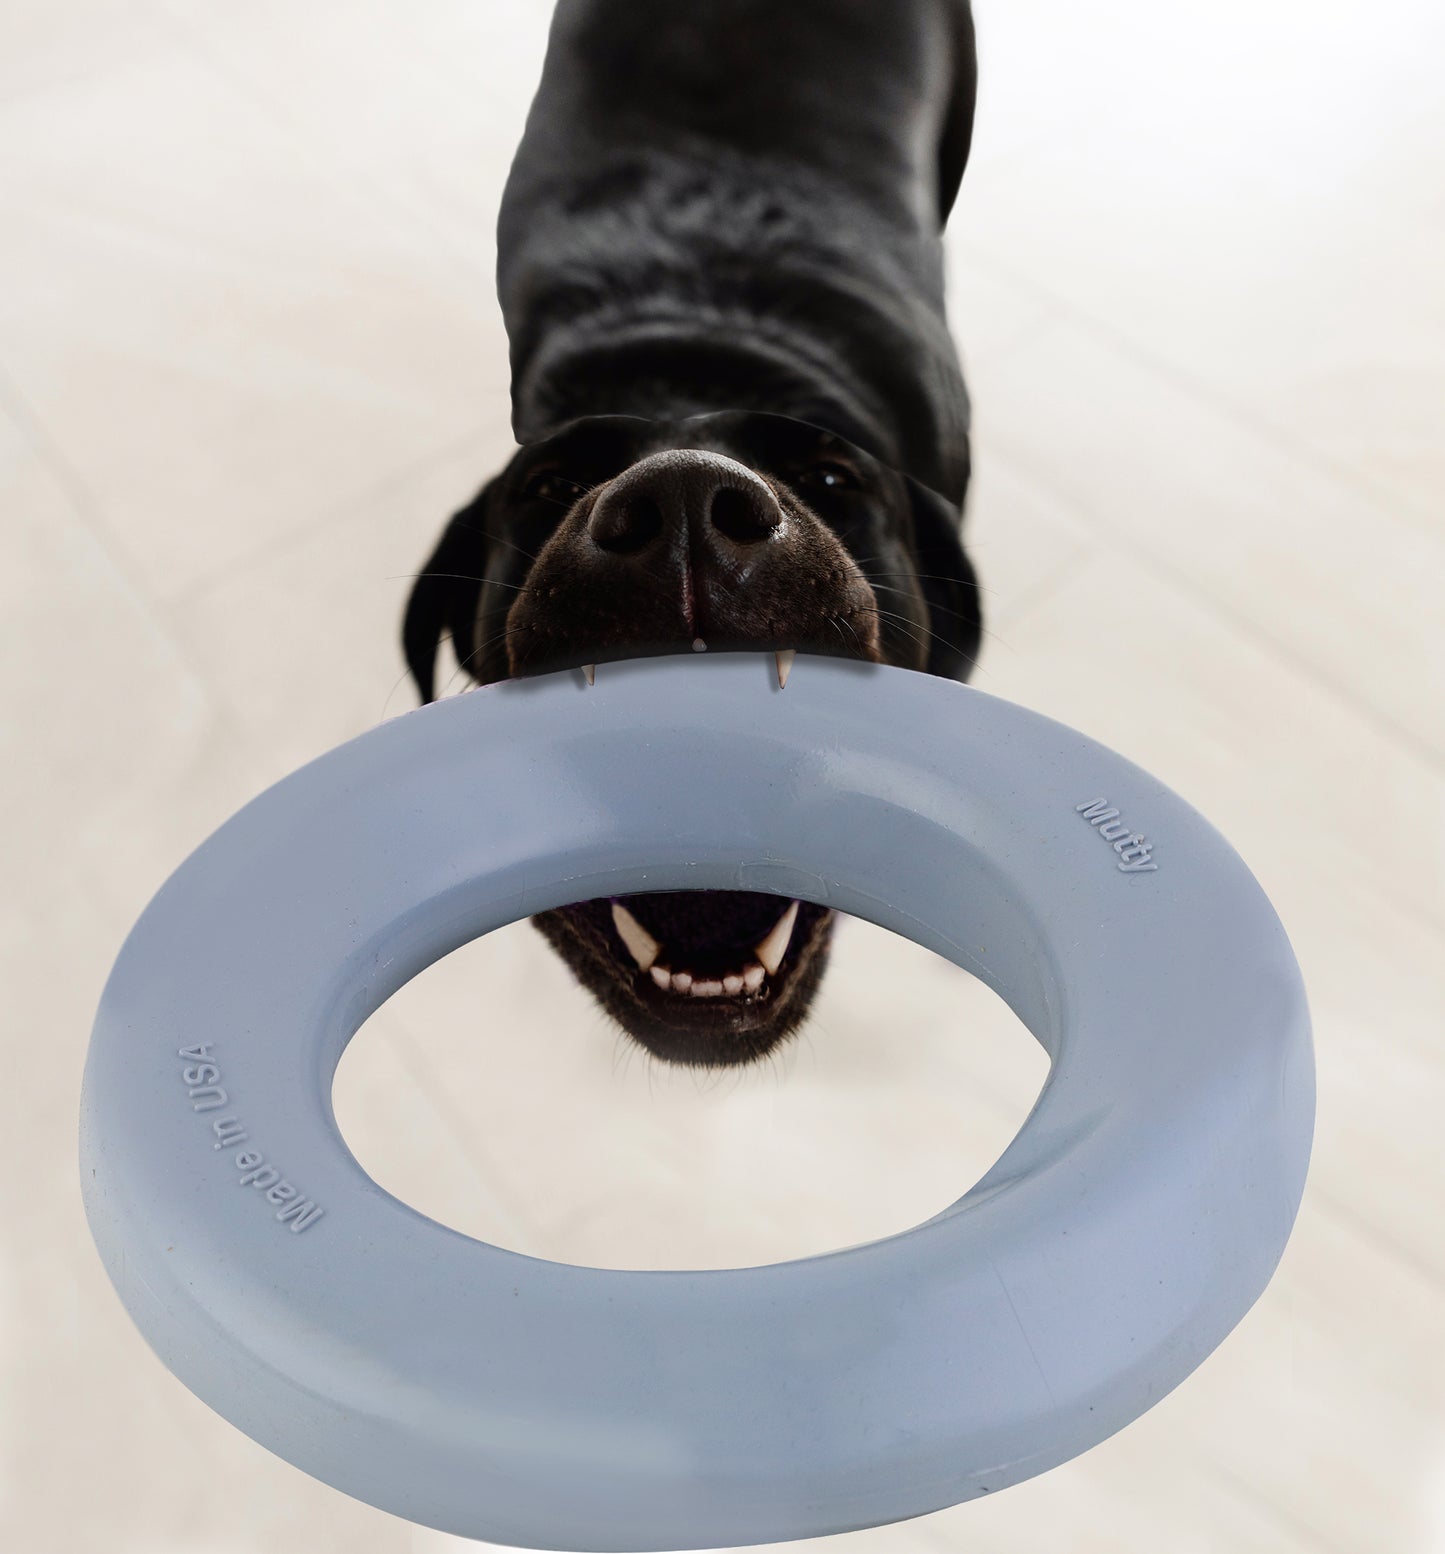 Mutty Dog Chew Ring - Made in USA Dog Toys for Chewers - One Meal Donated to Shelters per Toy